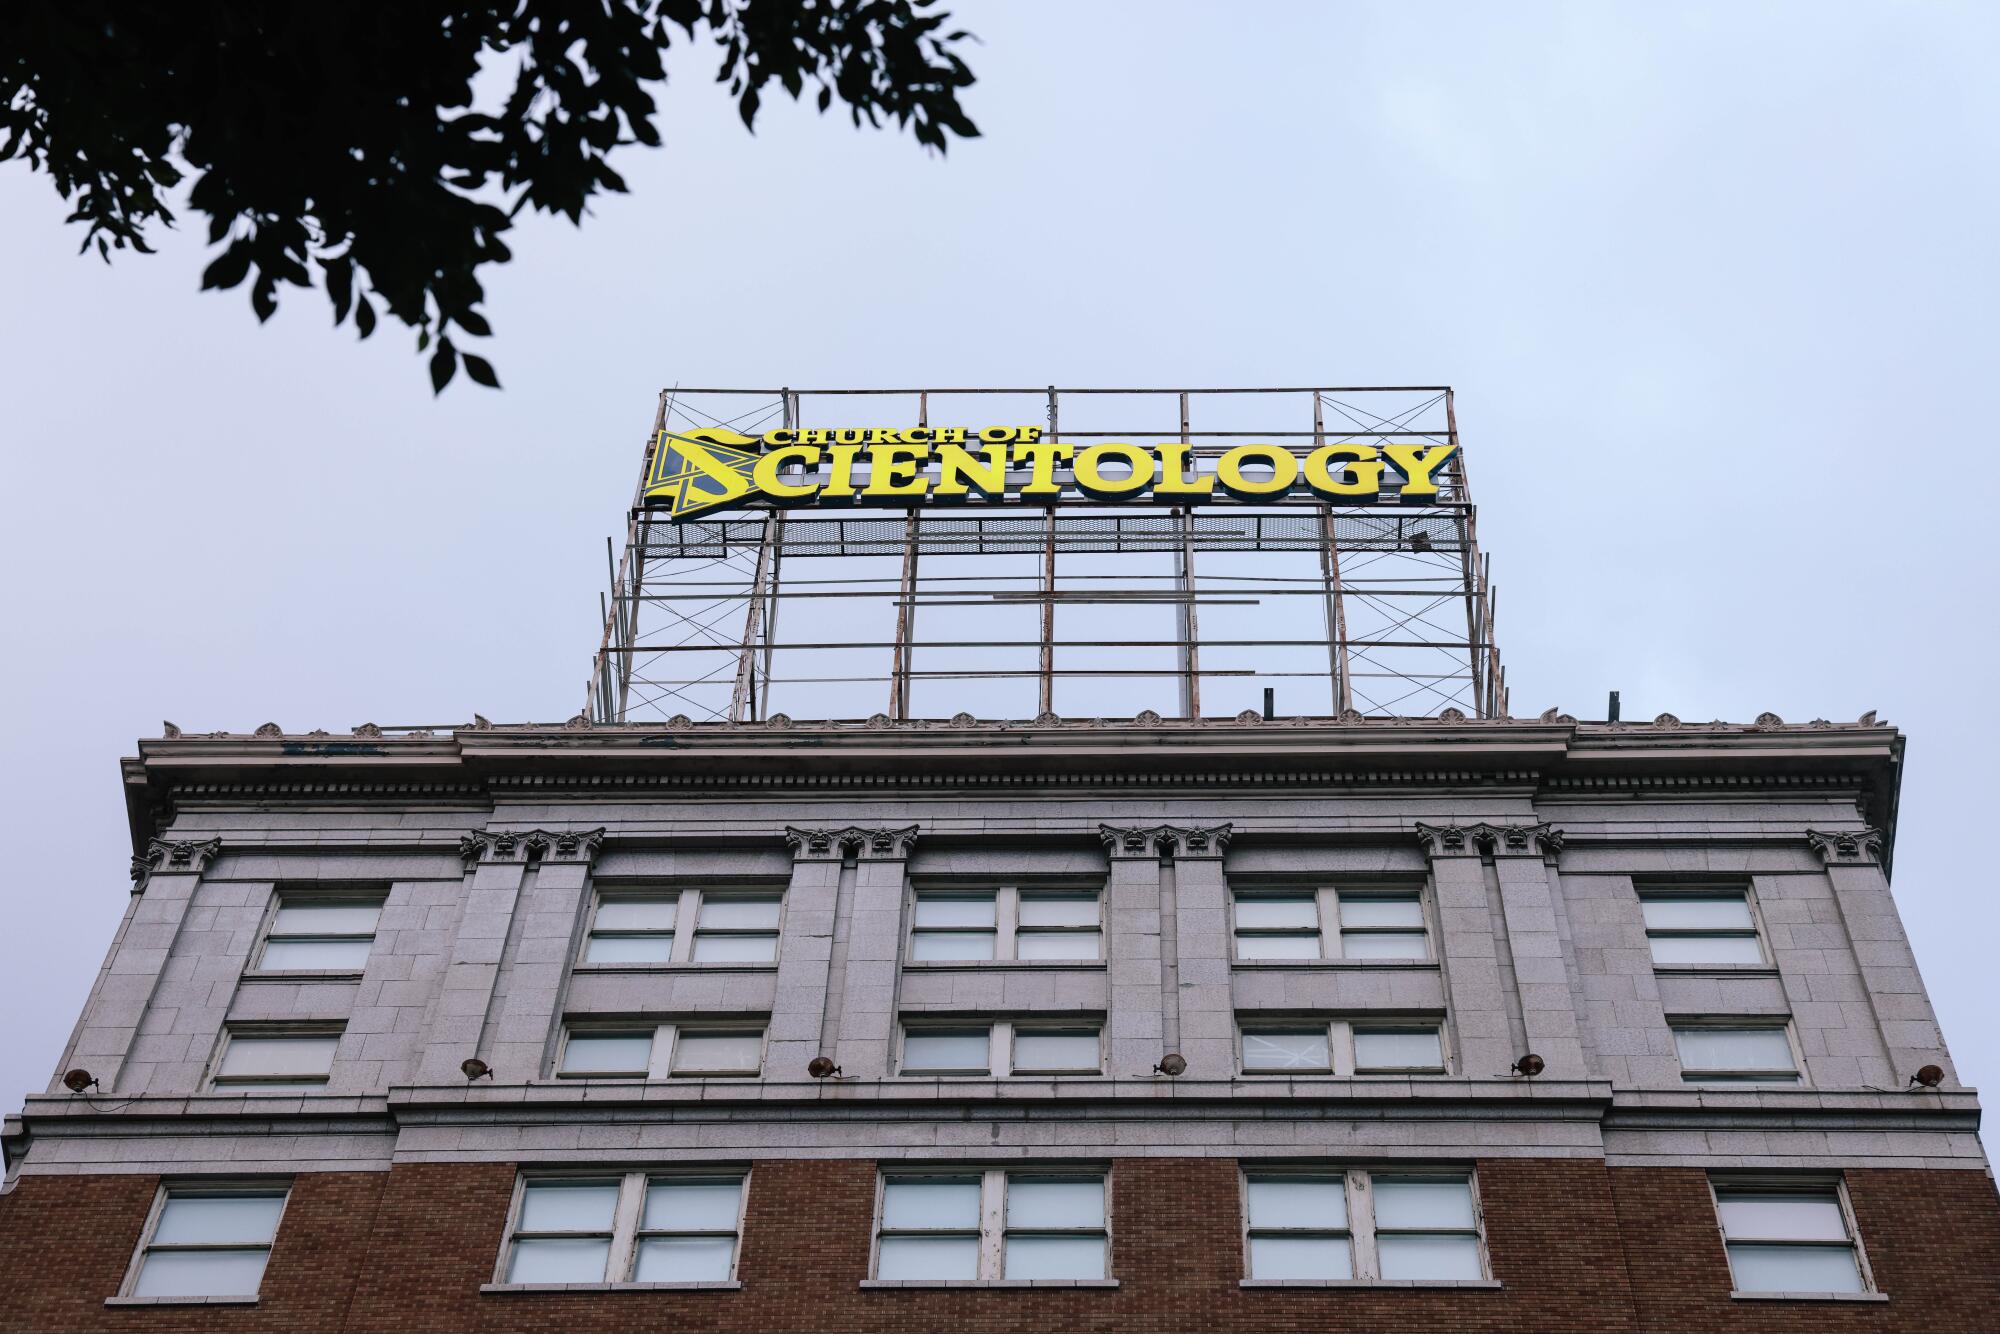 A Church of Scientology building